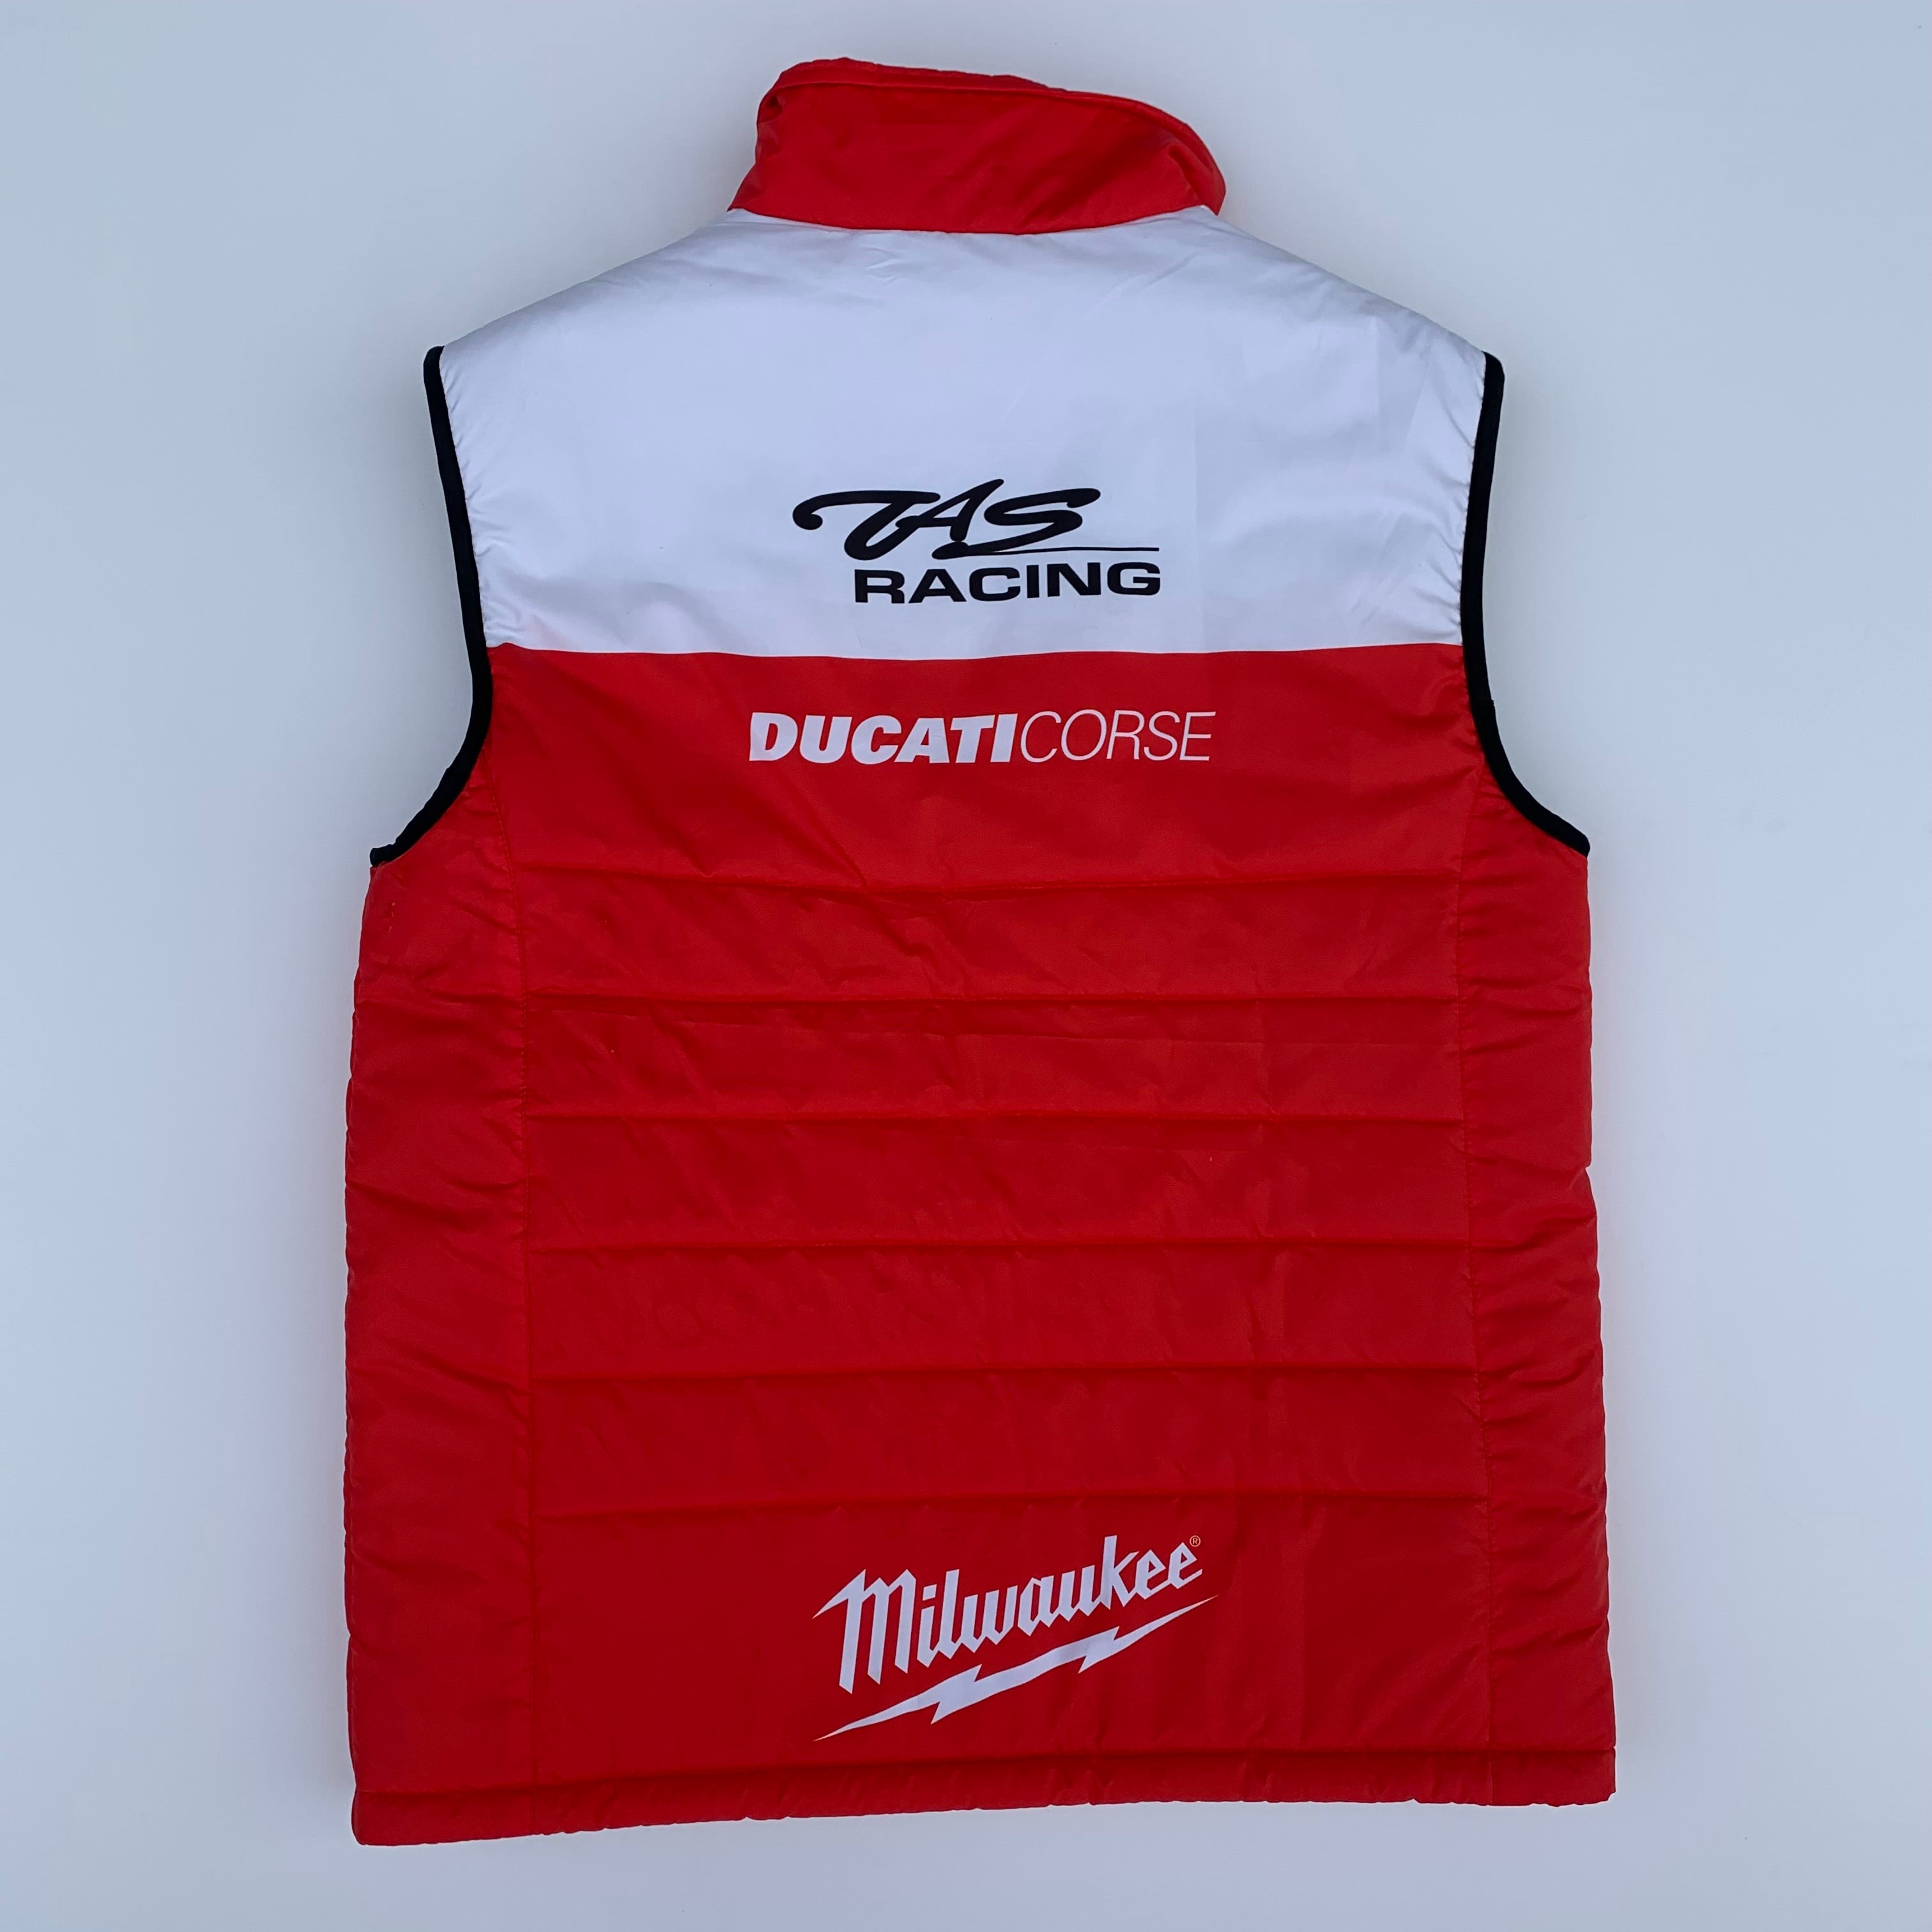 Red and White padded bodywarmer